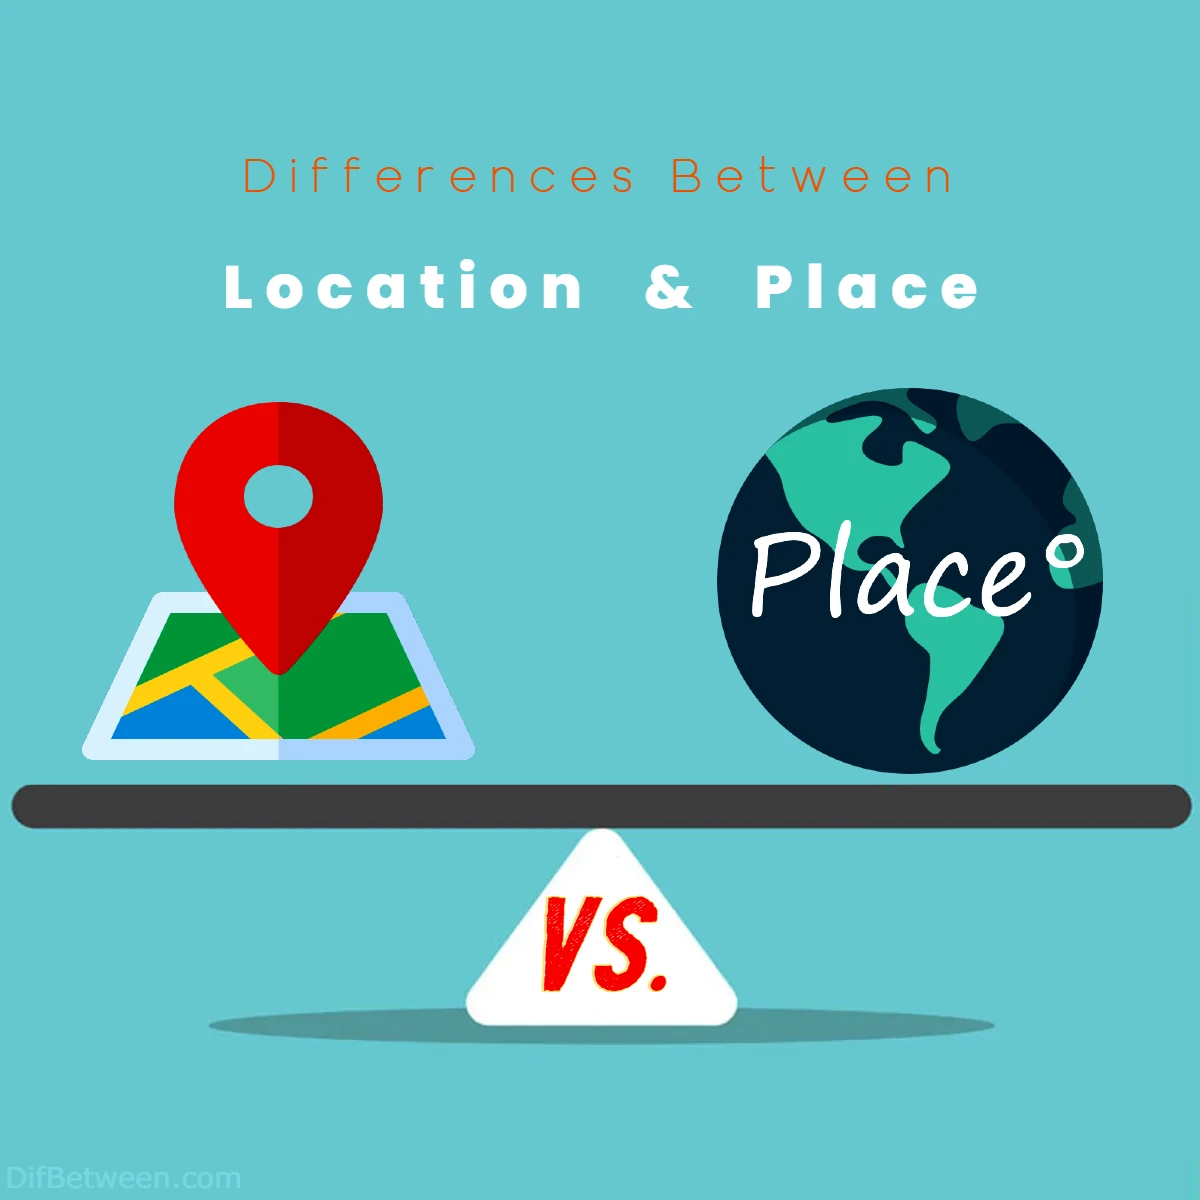 Differences Between Location vs Place